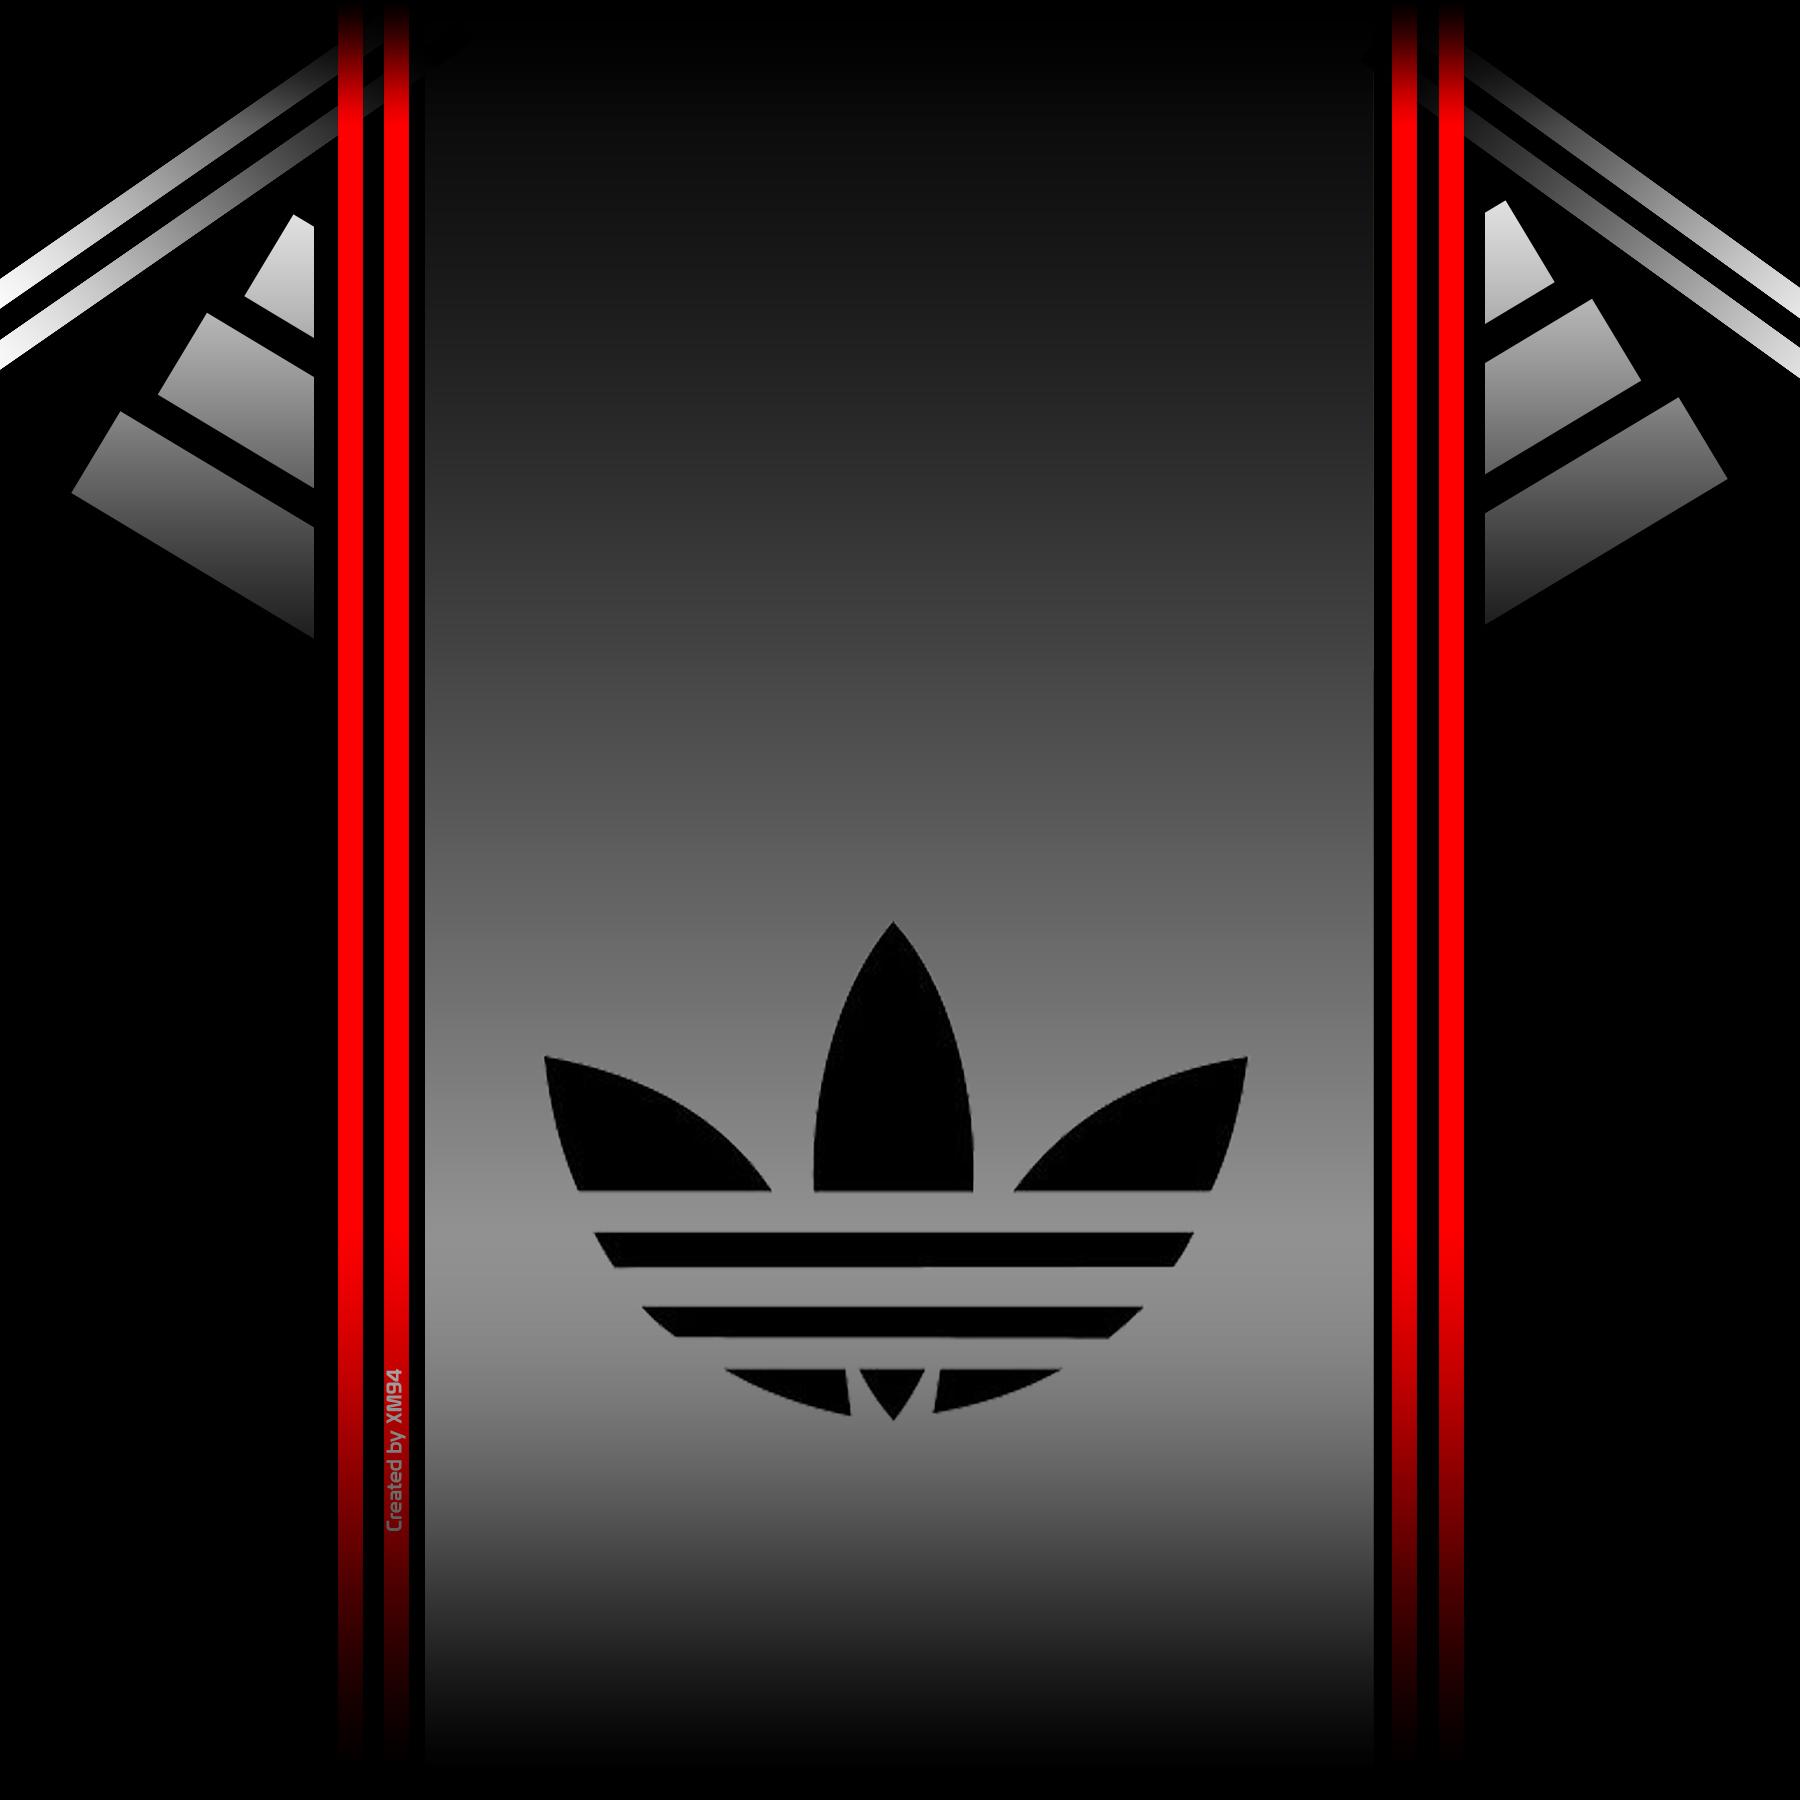 Best Adidas Wallpapers - Background Pictures Of Adidas - HD Wallpaper 